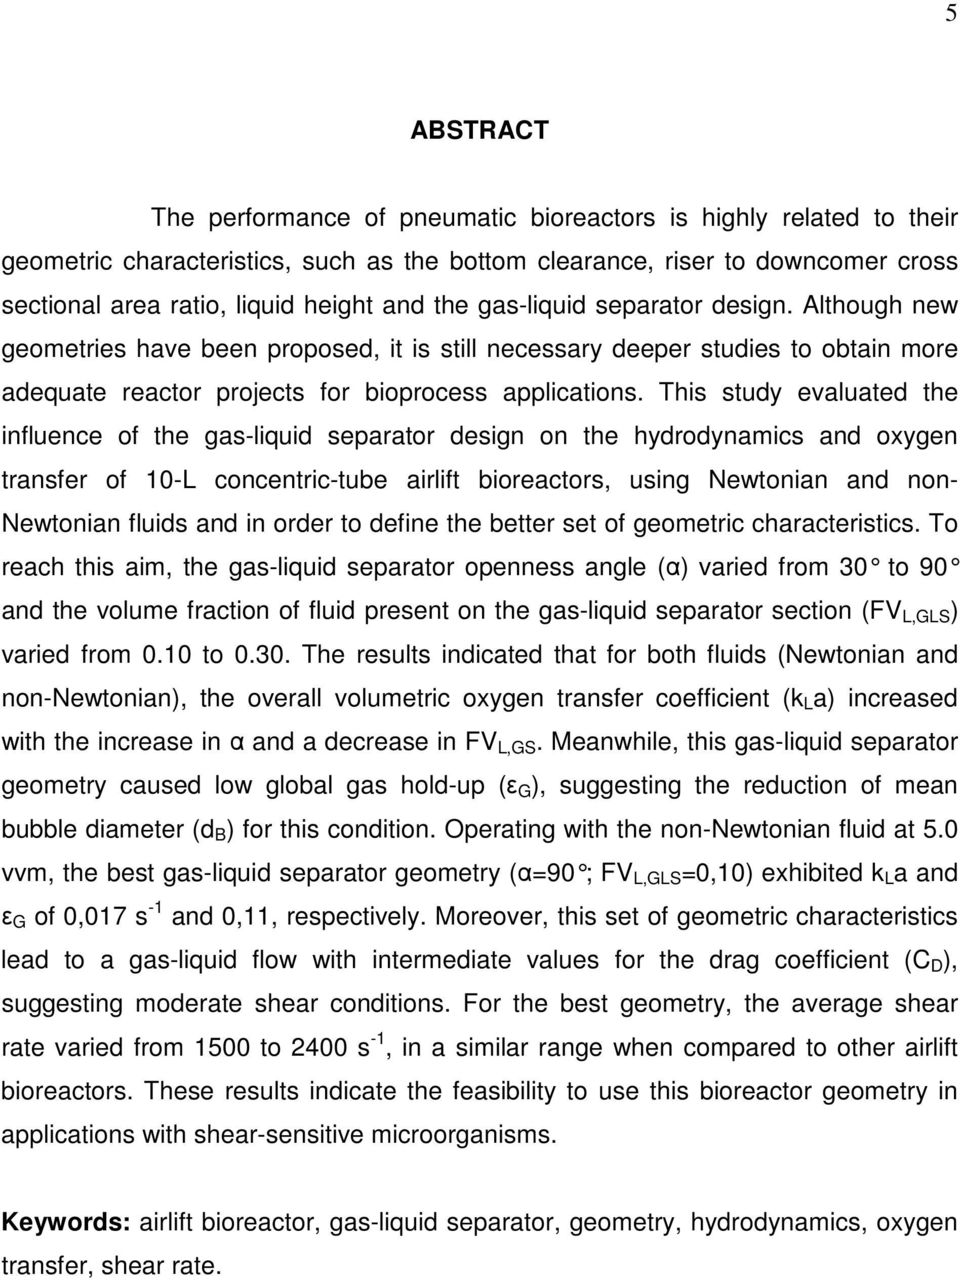 This study evaluated the influence of the gas-liquid separator design on the hydrodynamics and oxygen transfer of 10-L concentric-tube airlift bioreactors, using Newtonian and non- Newtonian fluids